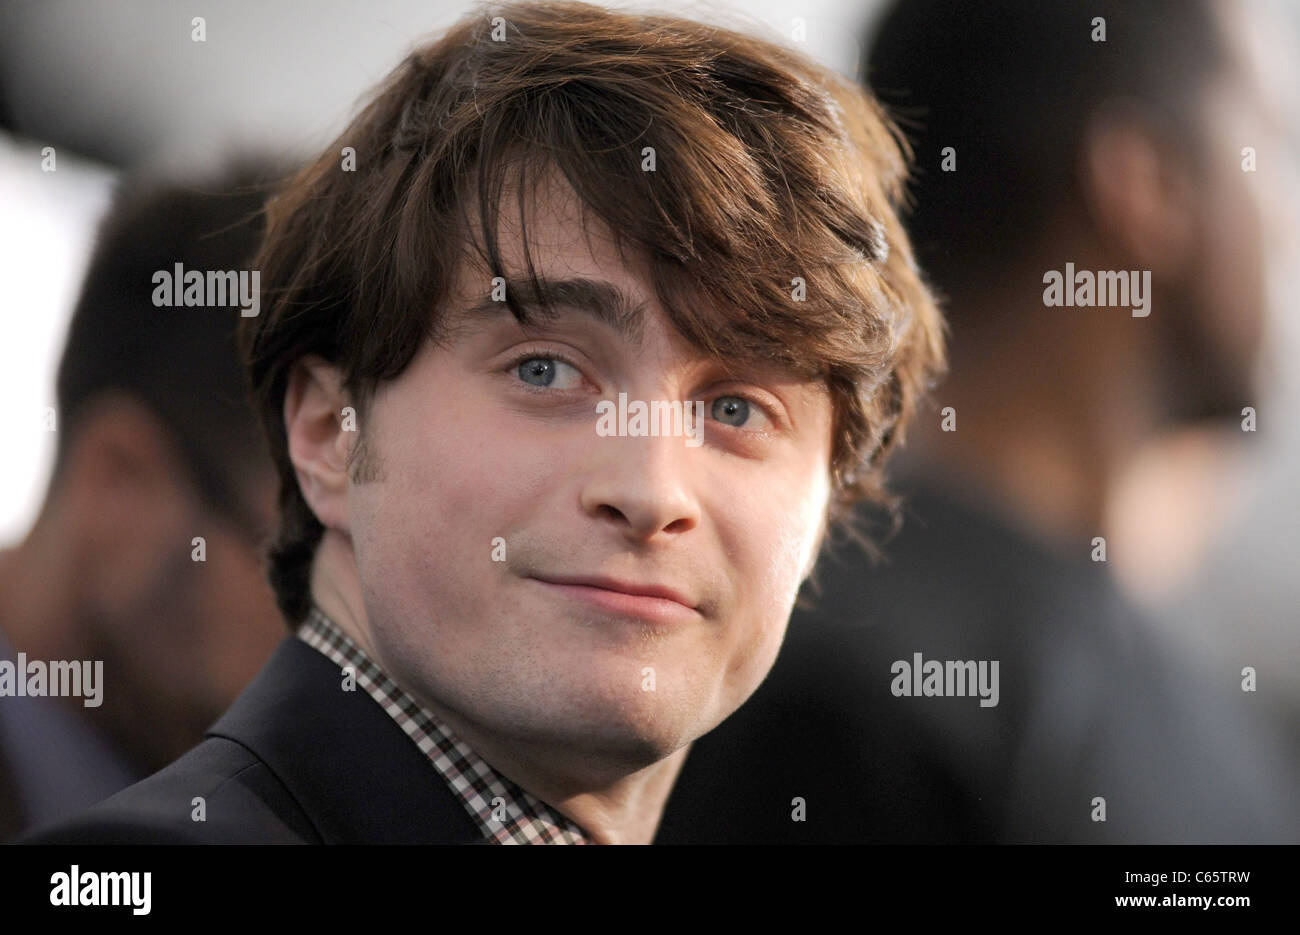 Daniel Radcliffe at arrivals for Harry Potter & the Deathly Hallows - Part 1 Premiere, Alice Tully Hall at Lincoln Center, New York, NY November 15, 2010. Photo By: Kristin Callahan/Everett Collection Stock Photo